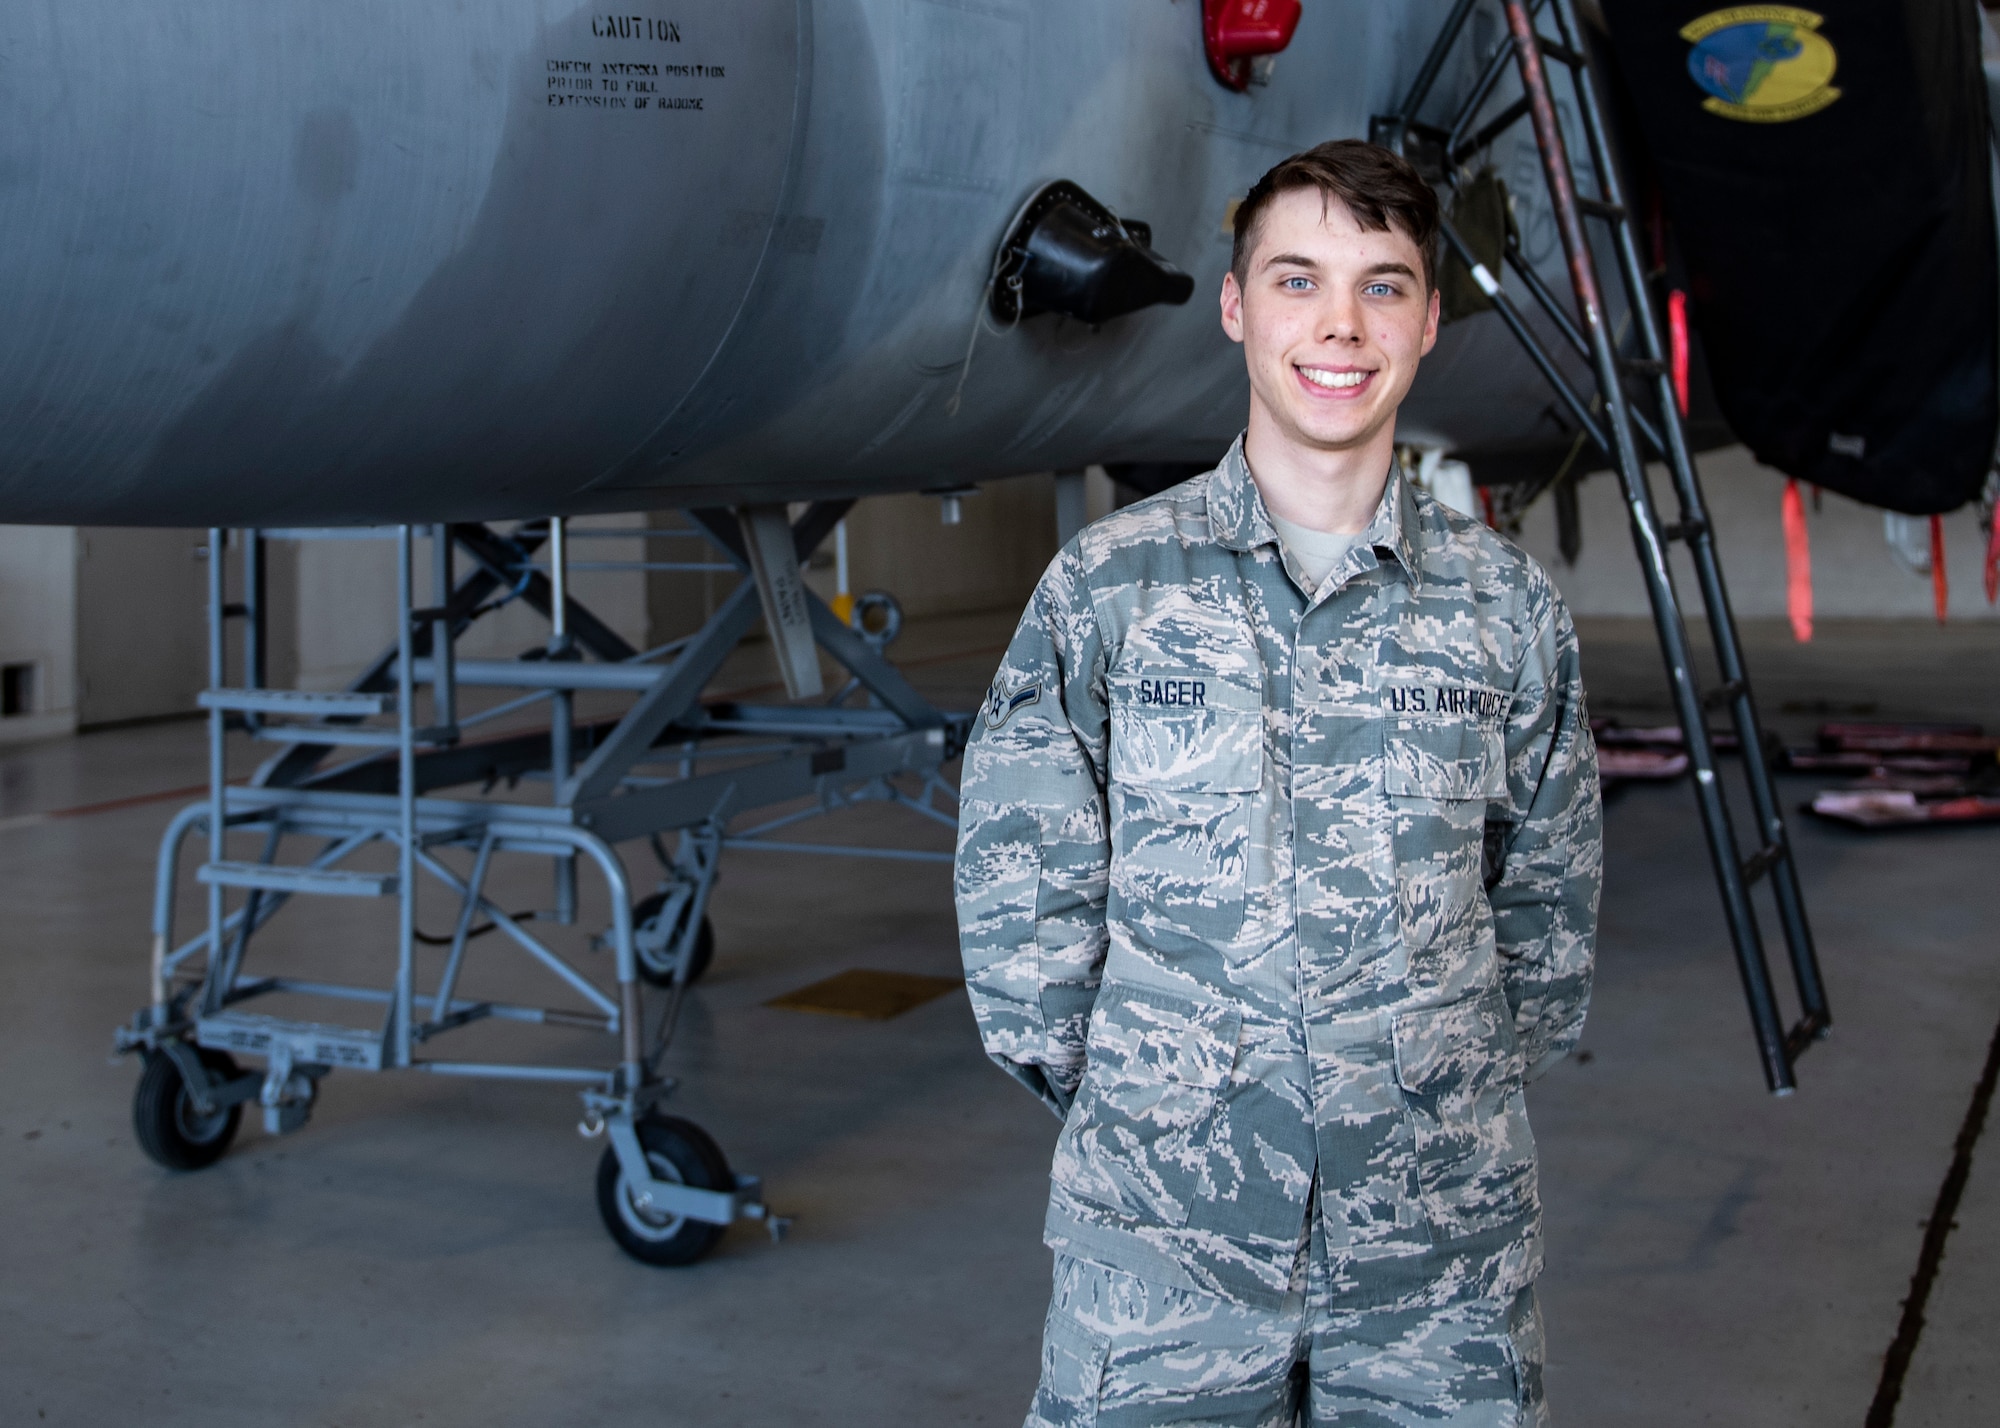 Airman Jacob Sager, 365th Training Squadron avionics apprentice course graduate, poses for a photo at Sheppard Air Force Base, Texas, Jan. 16, 2019. Sager earned the ACE award for getting perfect scores on all his performance checks and tests. (U.S. Air Force photo by Senior Airman Pedro Tenorio)